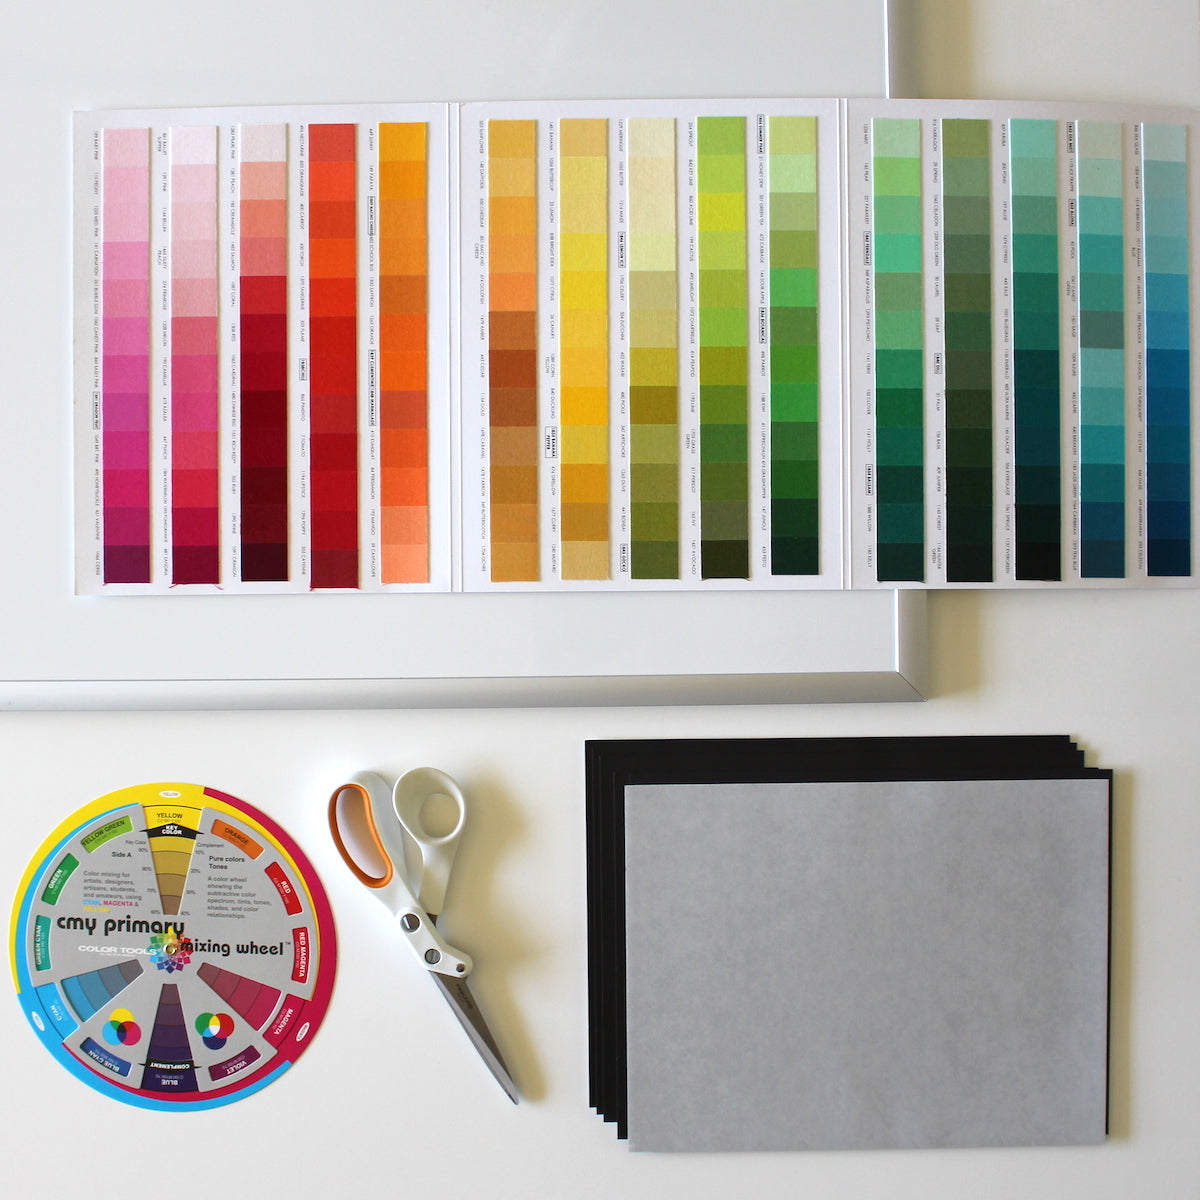 How to Make Your Own Stationery Swatch Books 